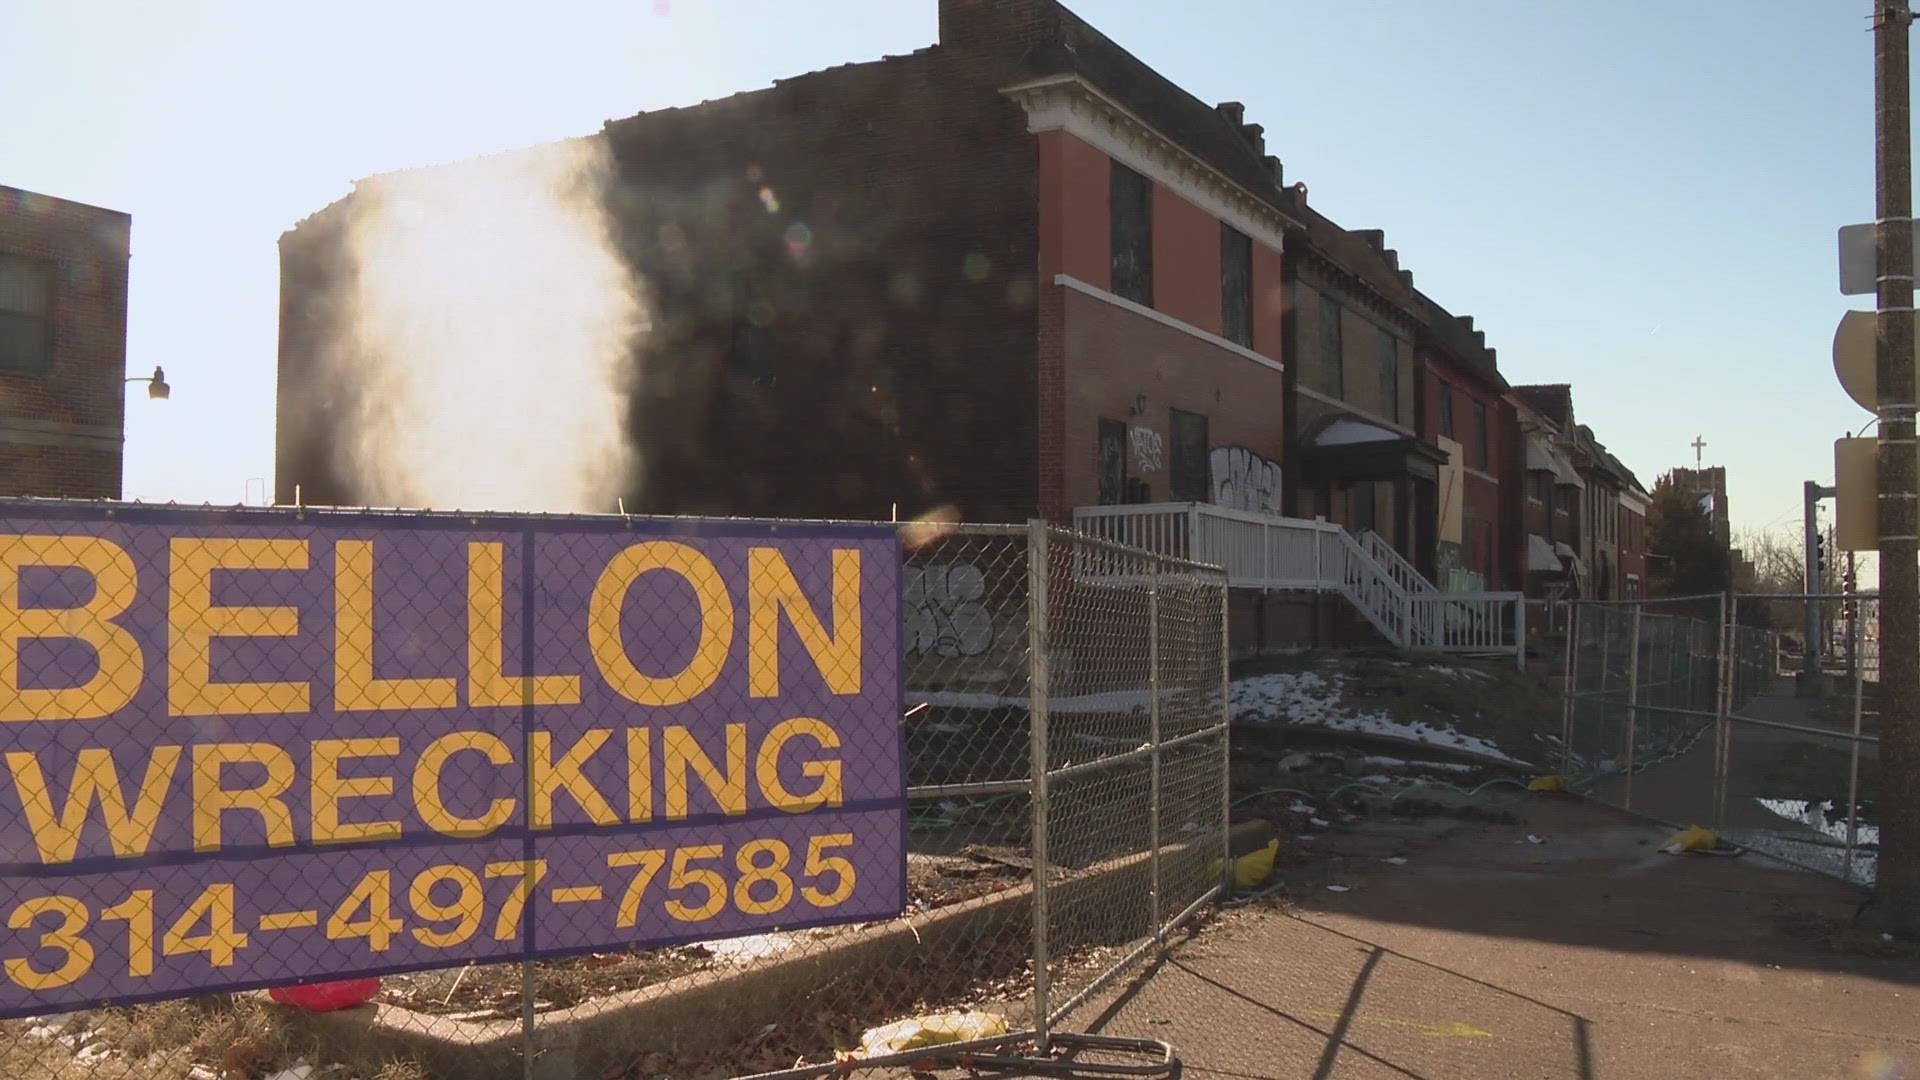 A south St. Louis neighborhood is getting rid of a major eyesore. A stretch of buildings that's been vacant for decades is finally coming down.